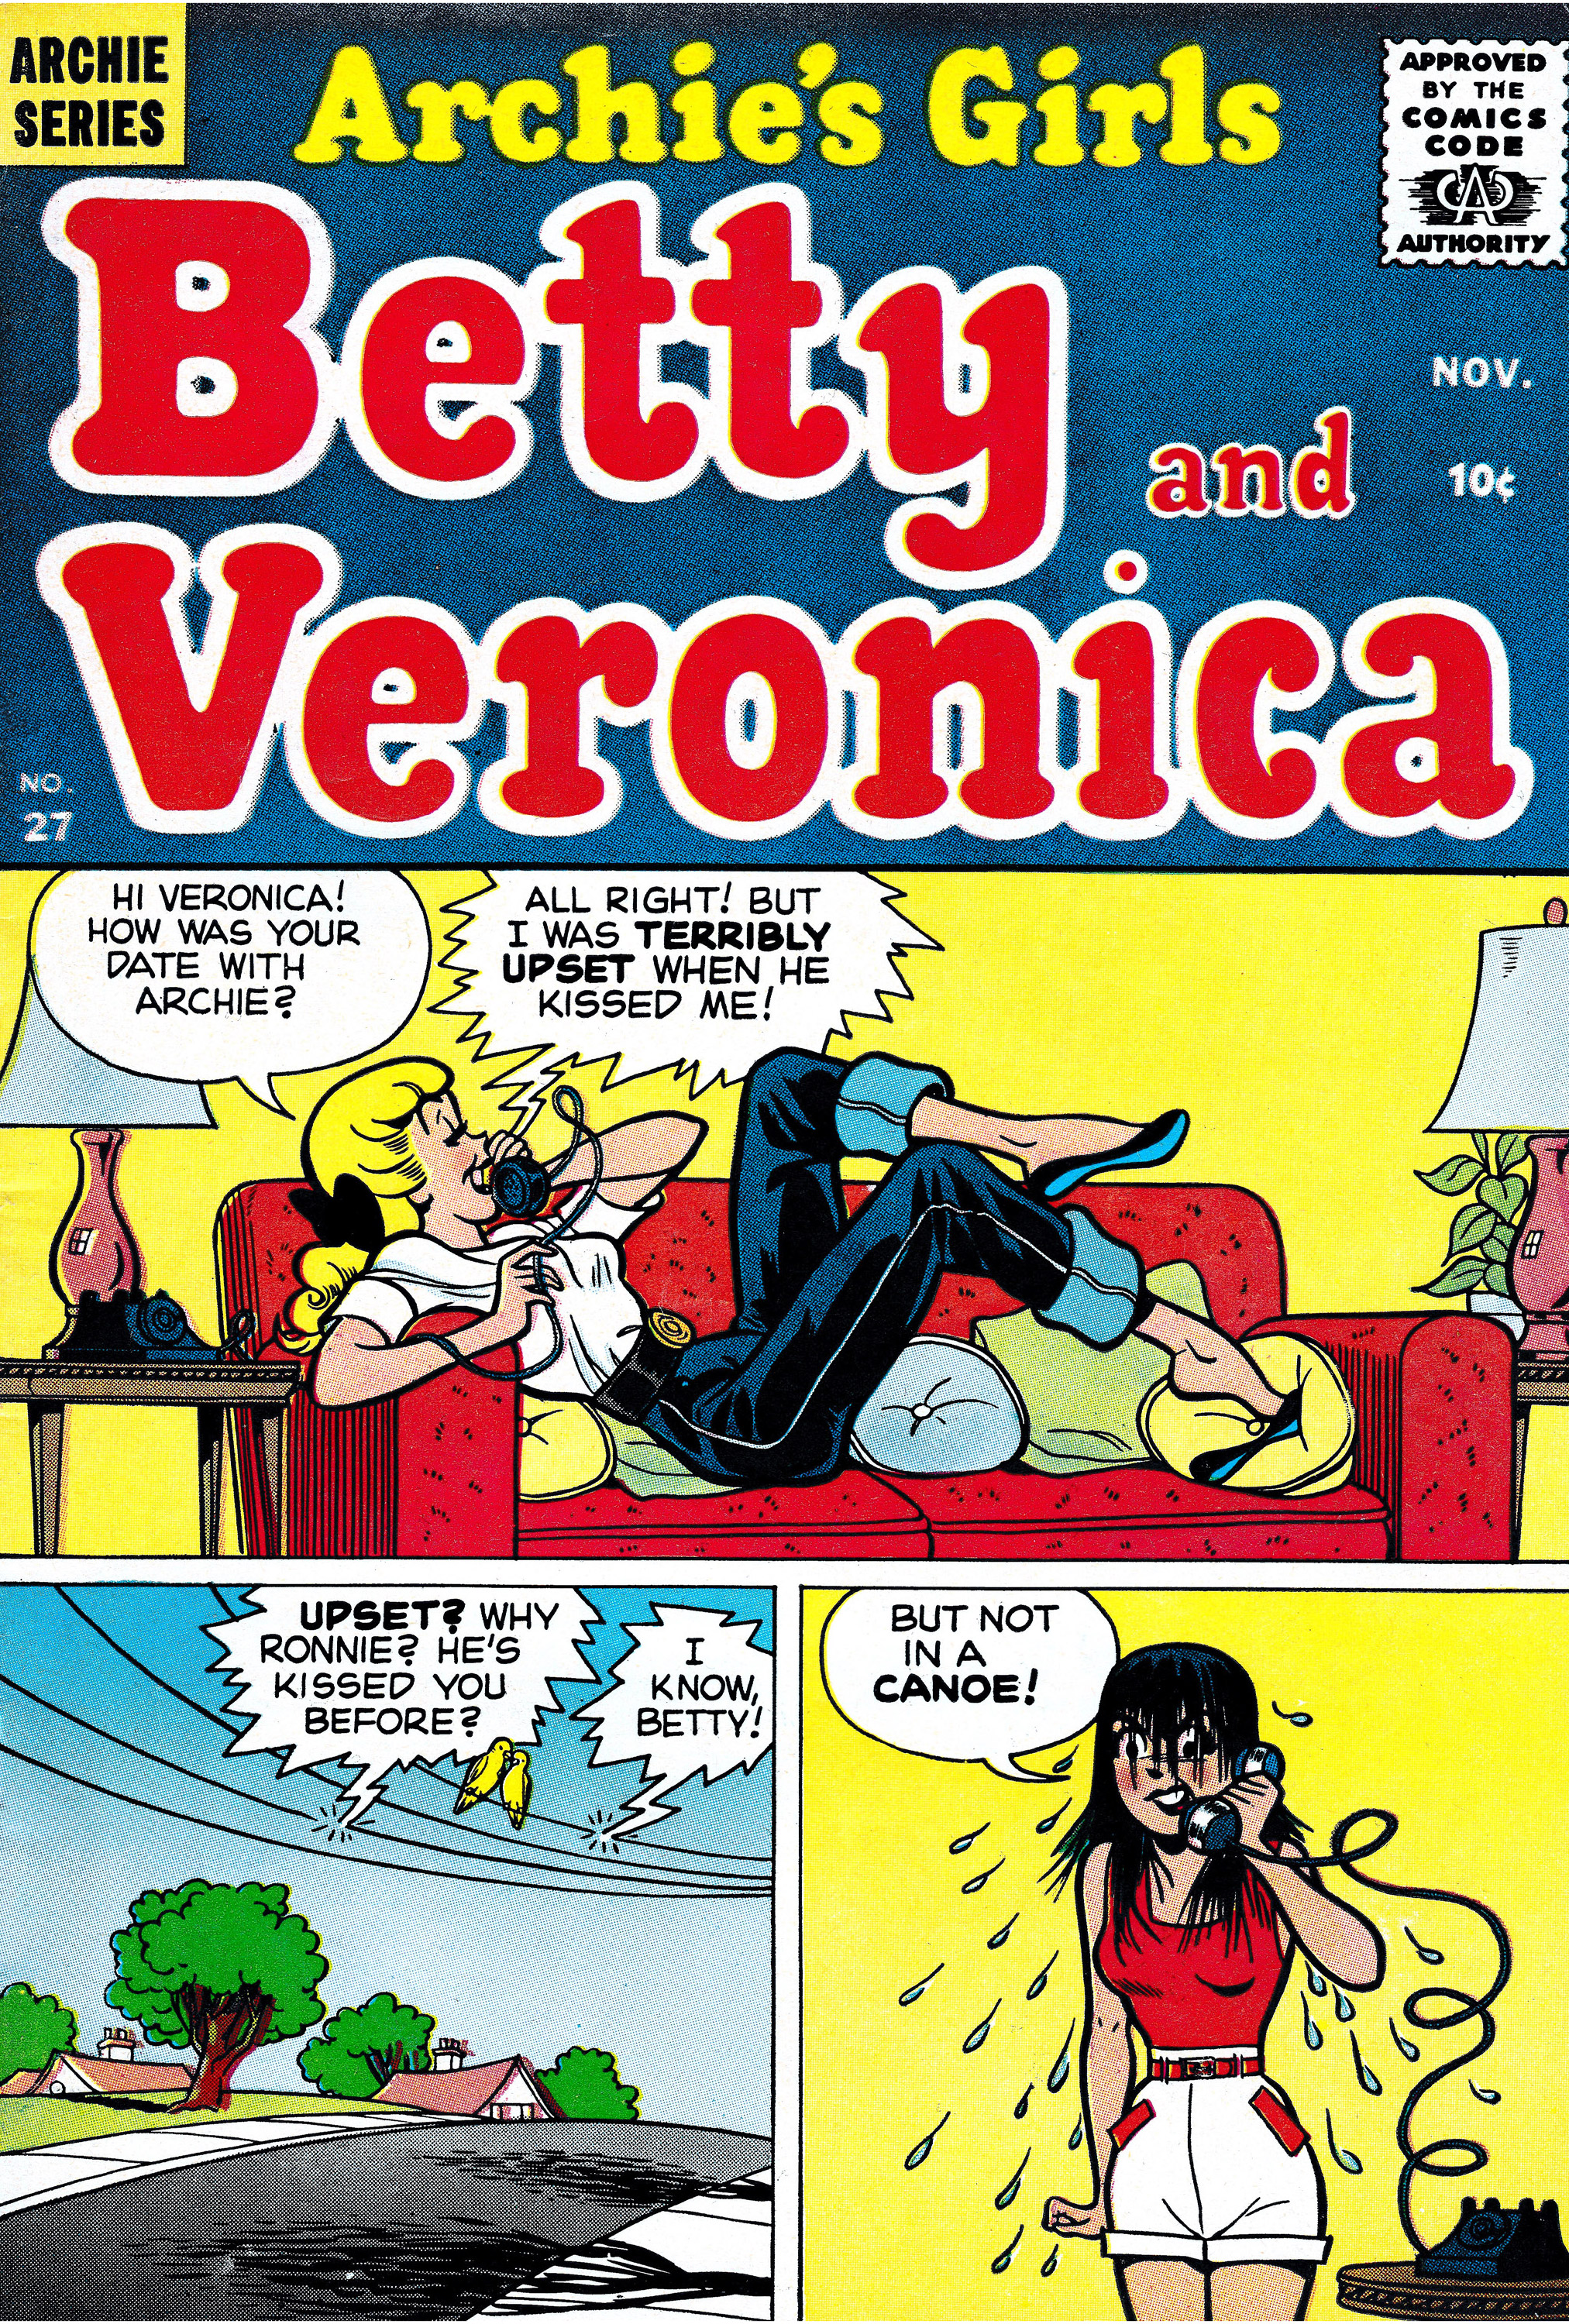 Read online Archie's Girls Betty and Veronica comic -  Issue #27 - 1